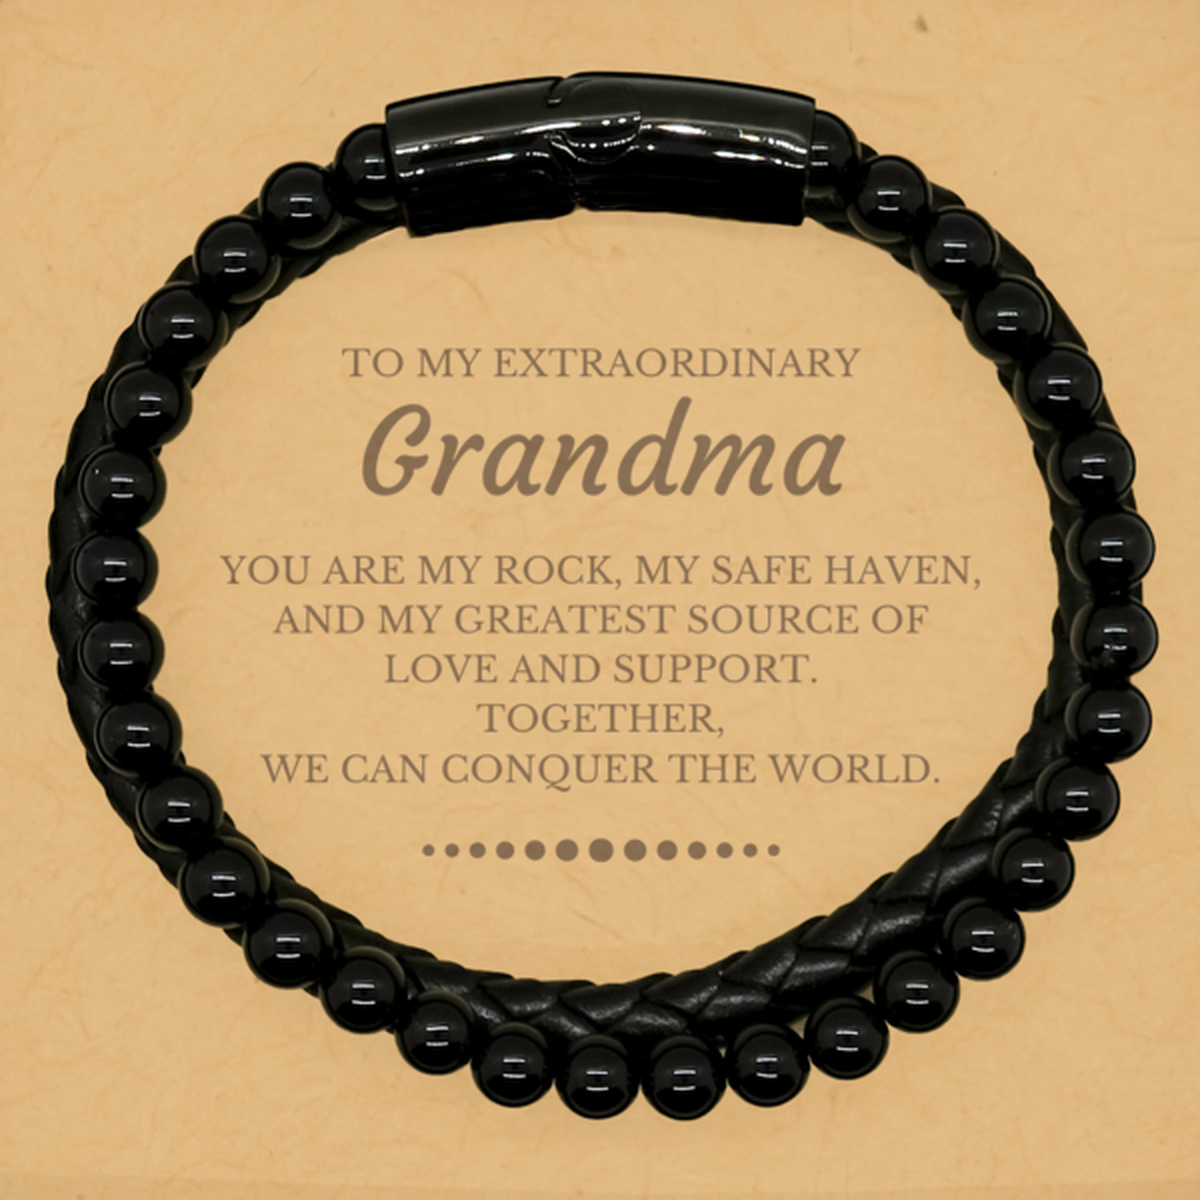 To My Extraordinary Grandma Gifts, Together, we can conquer the world, Birthday Stone Leather Bracelets For Grandma, Christmas Gifts For Grandma